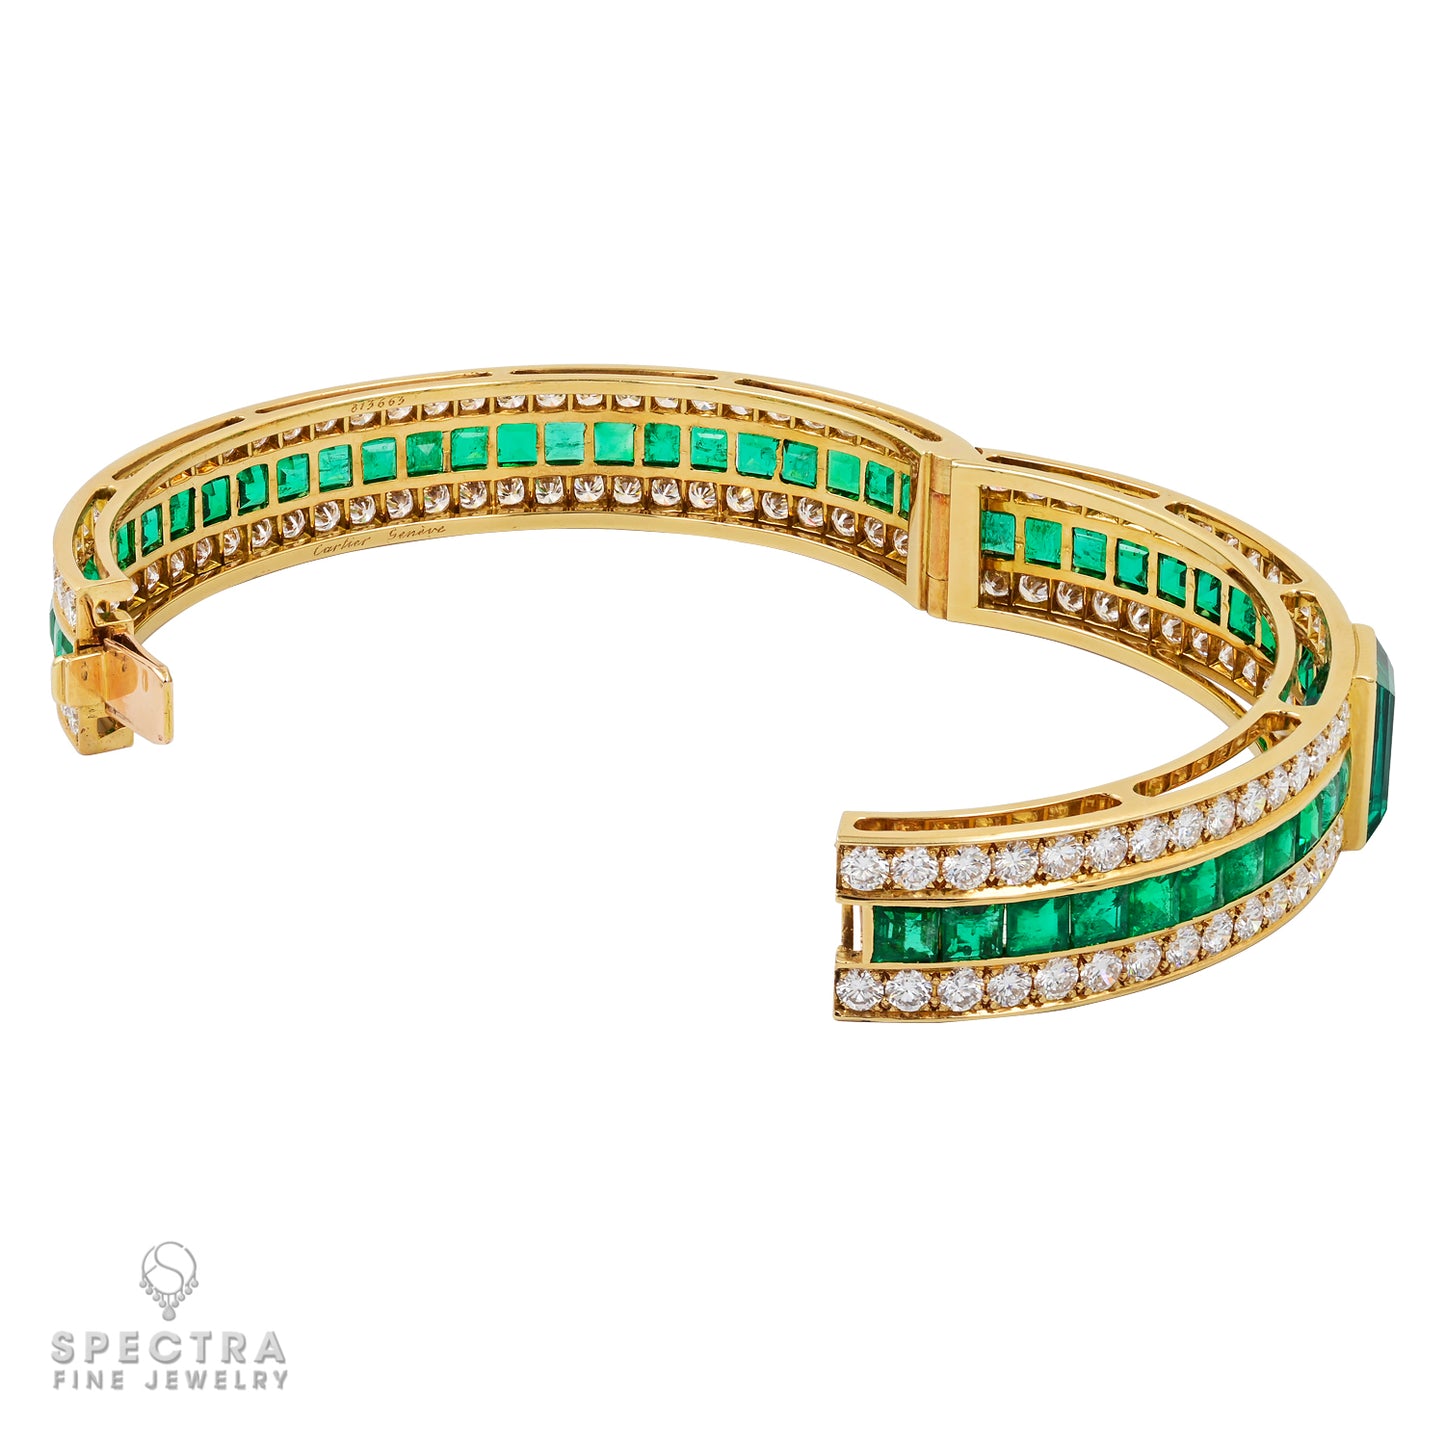 Cartier Emerald Diamond Bangle: Exquisite Jewelry from 1984